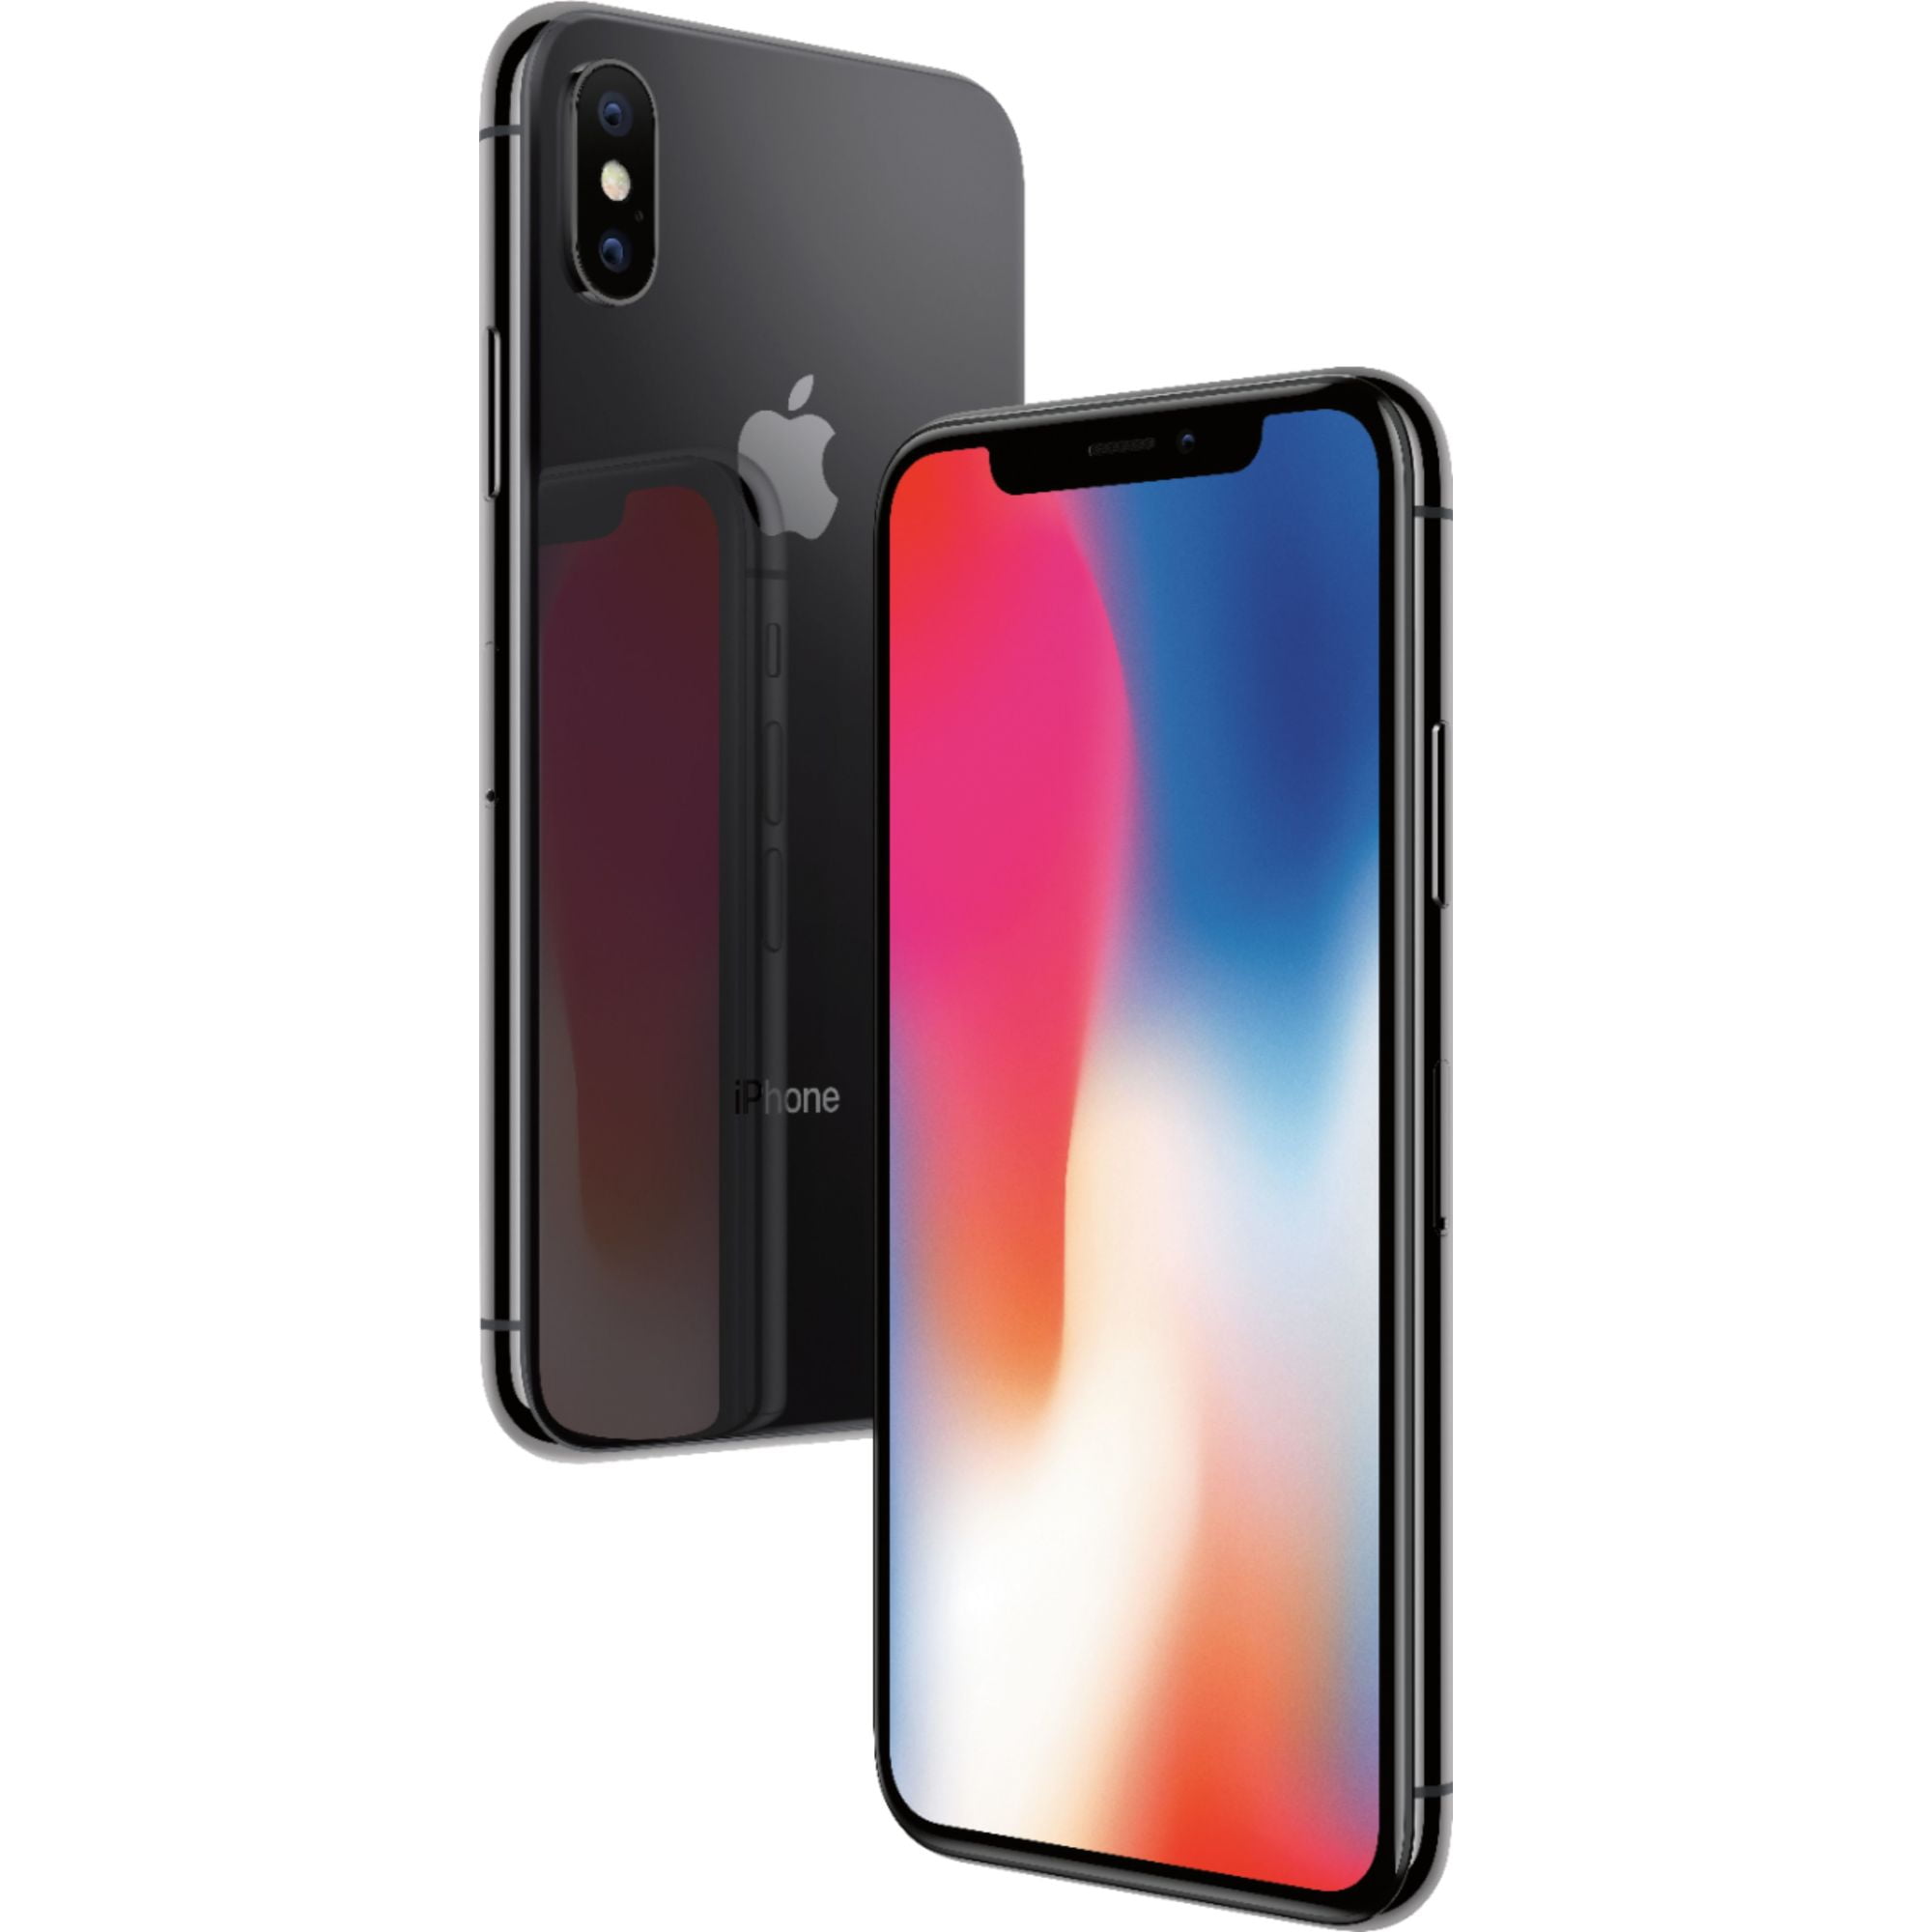 Restored Apple iPhone X 256GB, Space Gray - Unlocked T-Mobile (Refurbished)